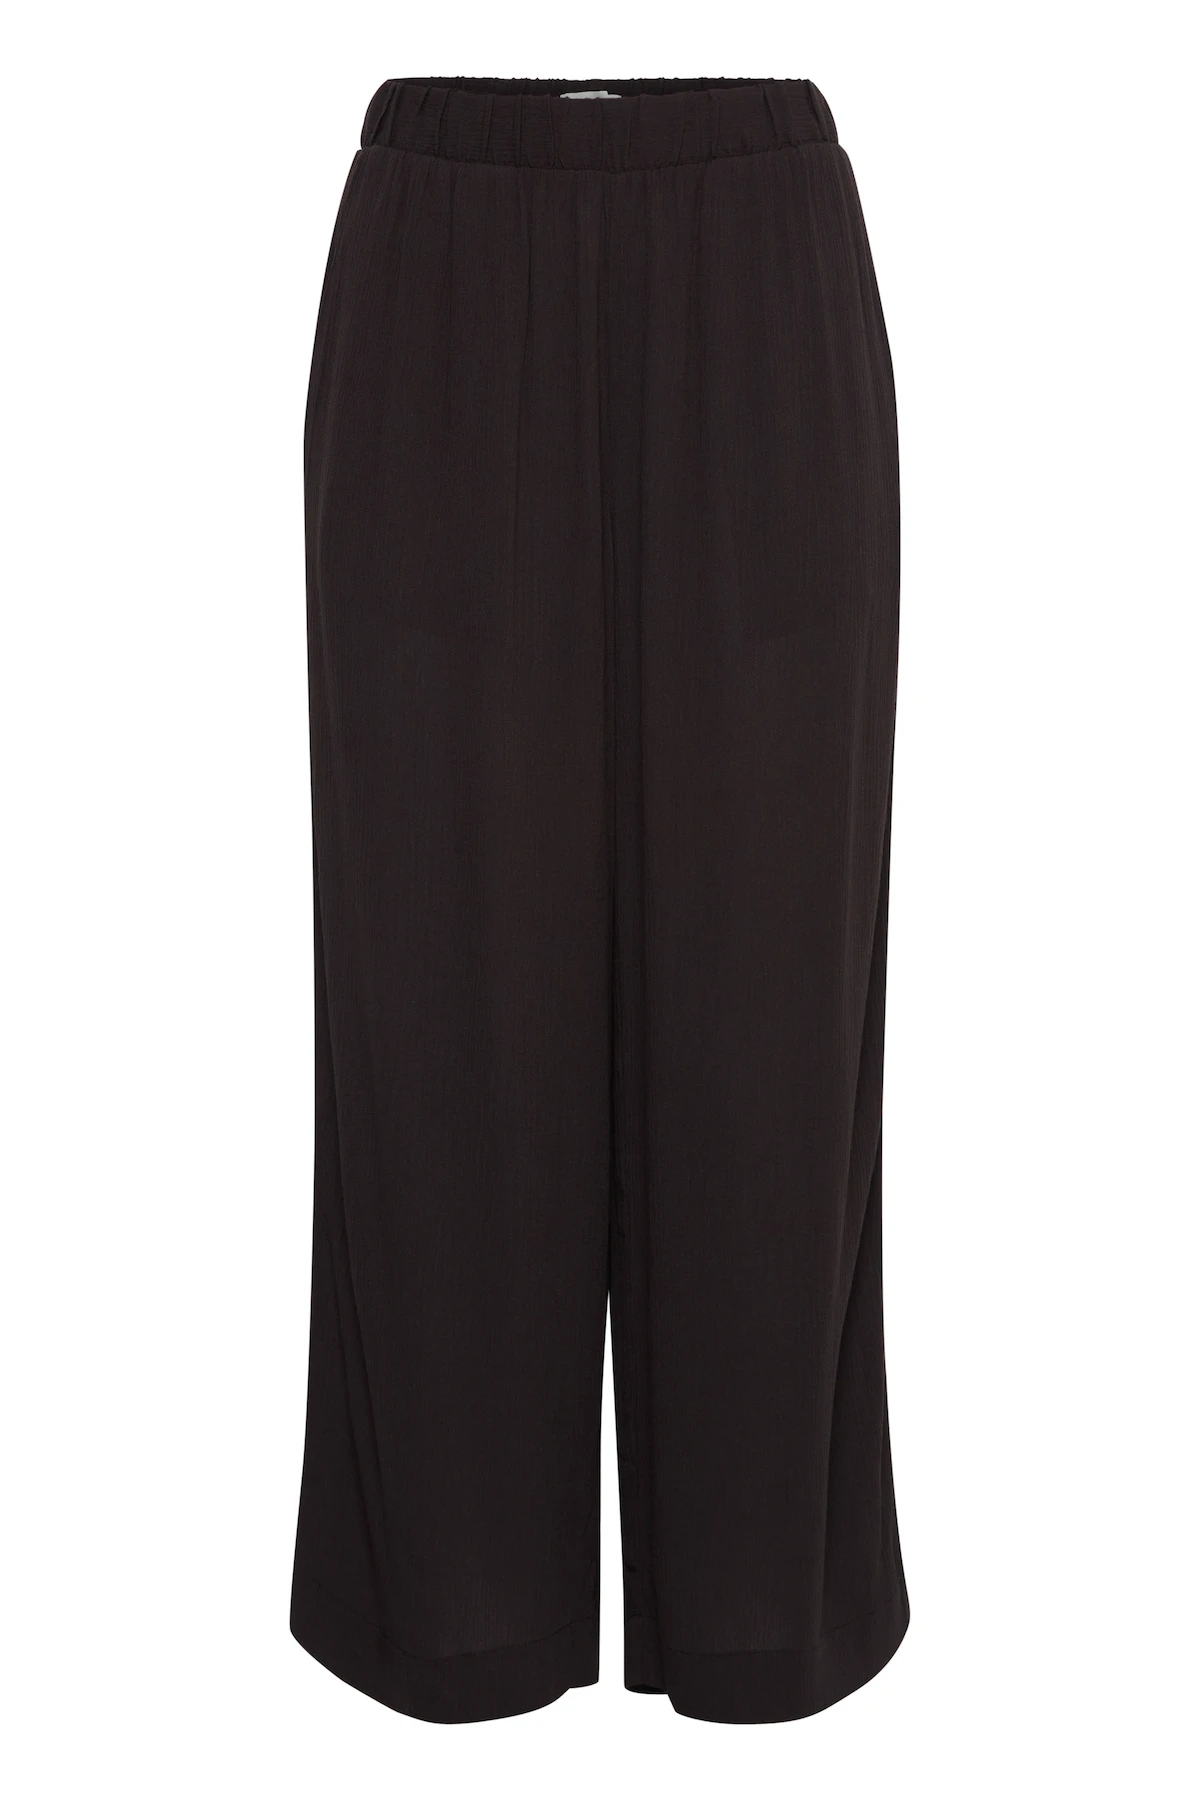 Cheap pants and leggings online - buy trousers on sale here